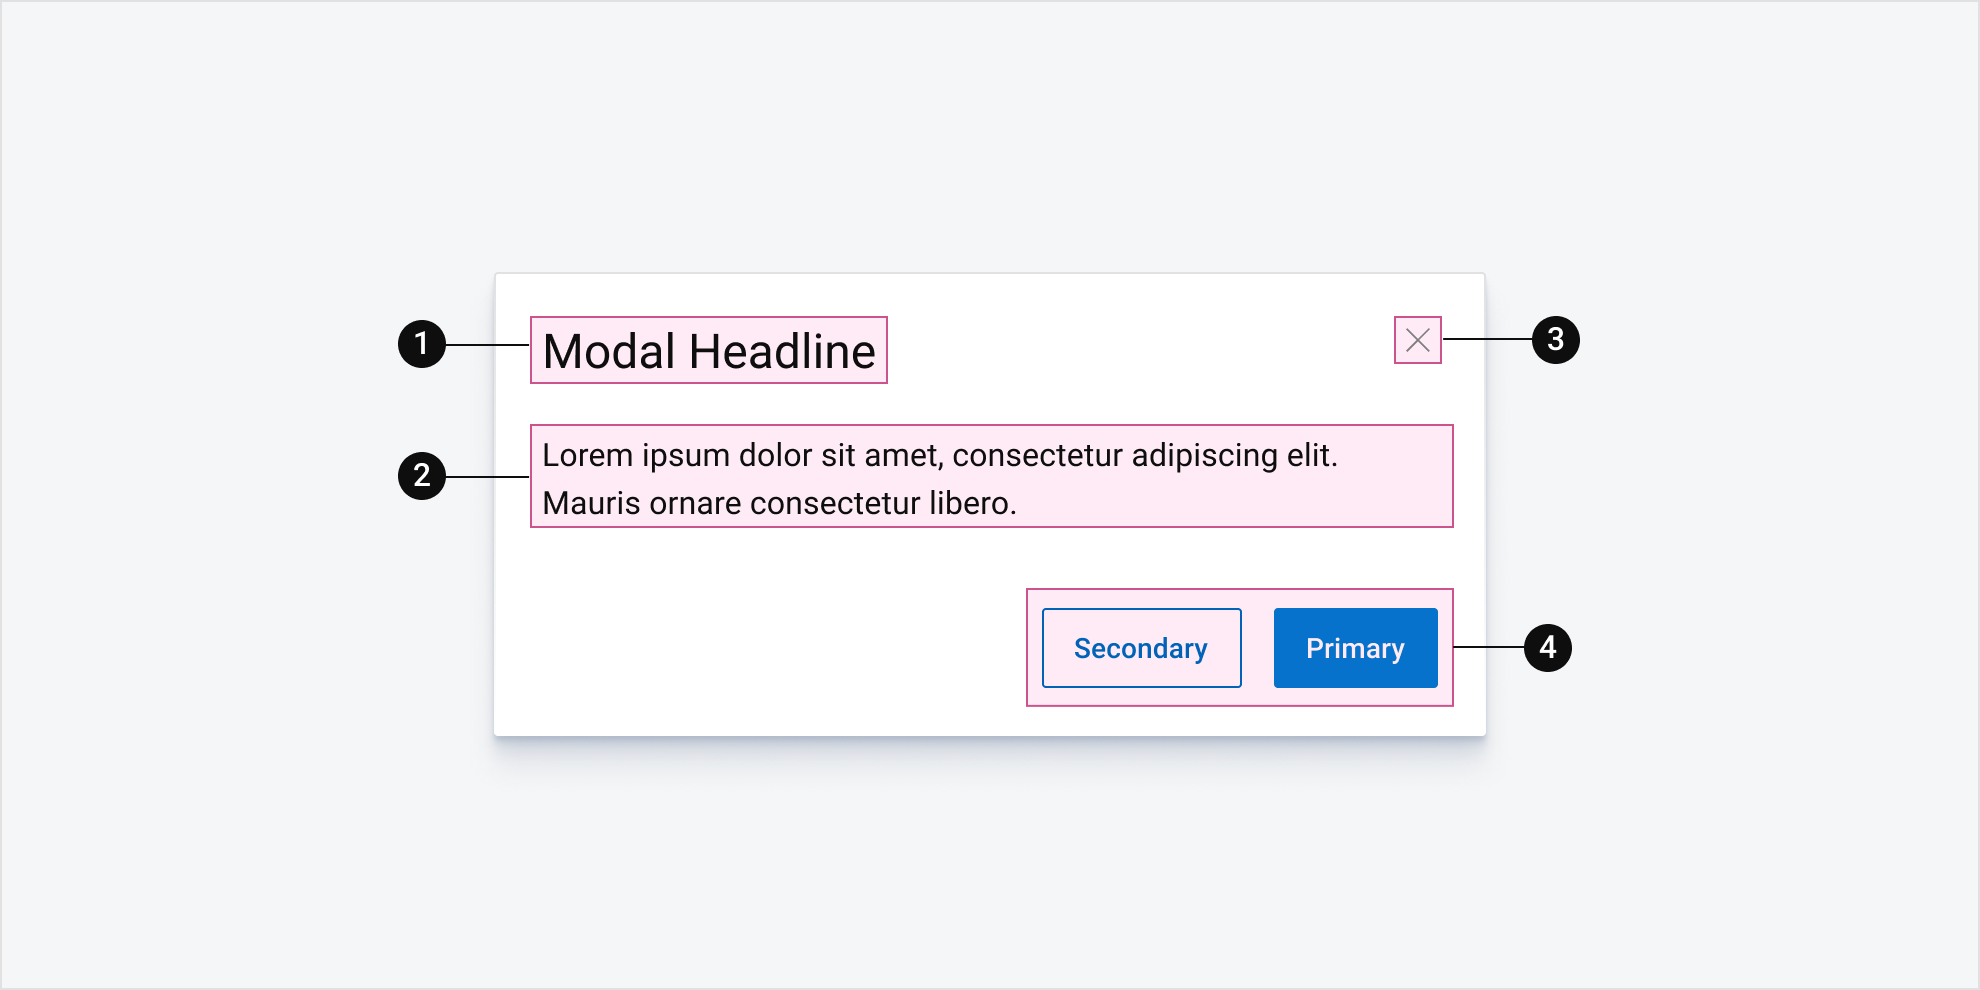 The anatomy of a modal, labeled 1 through 4.